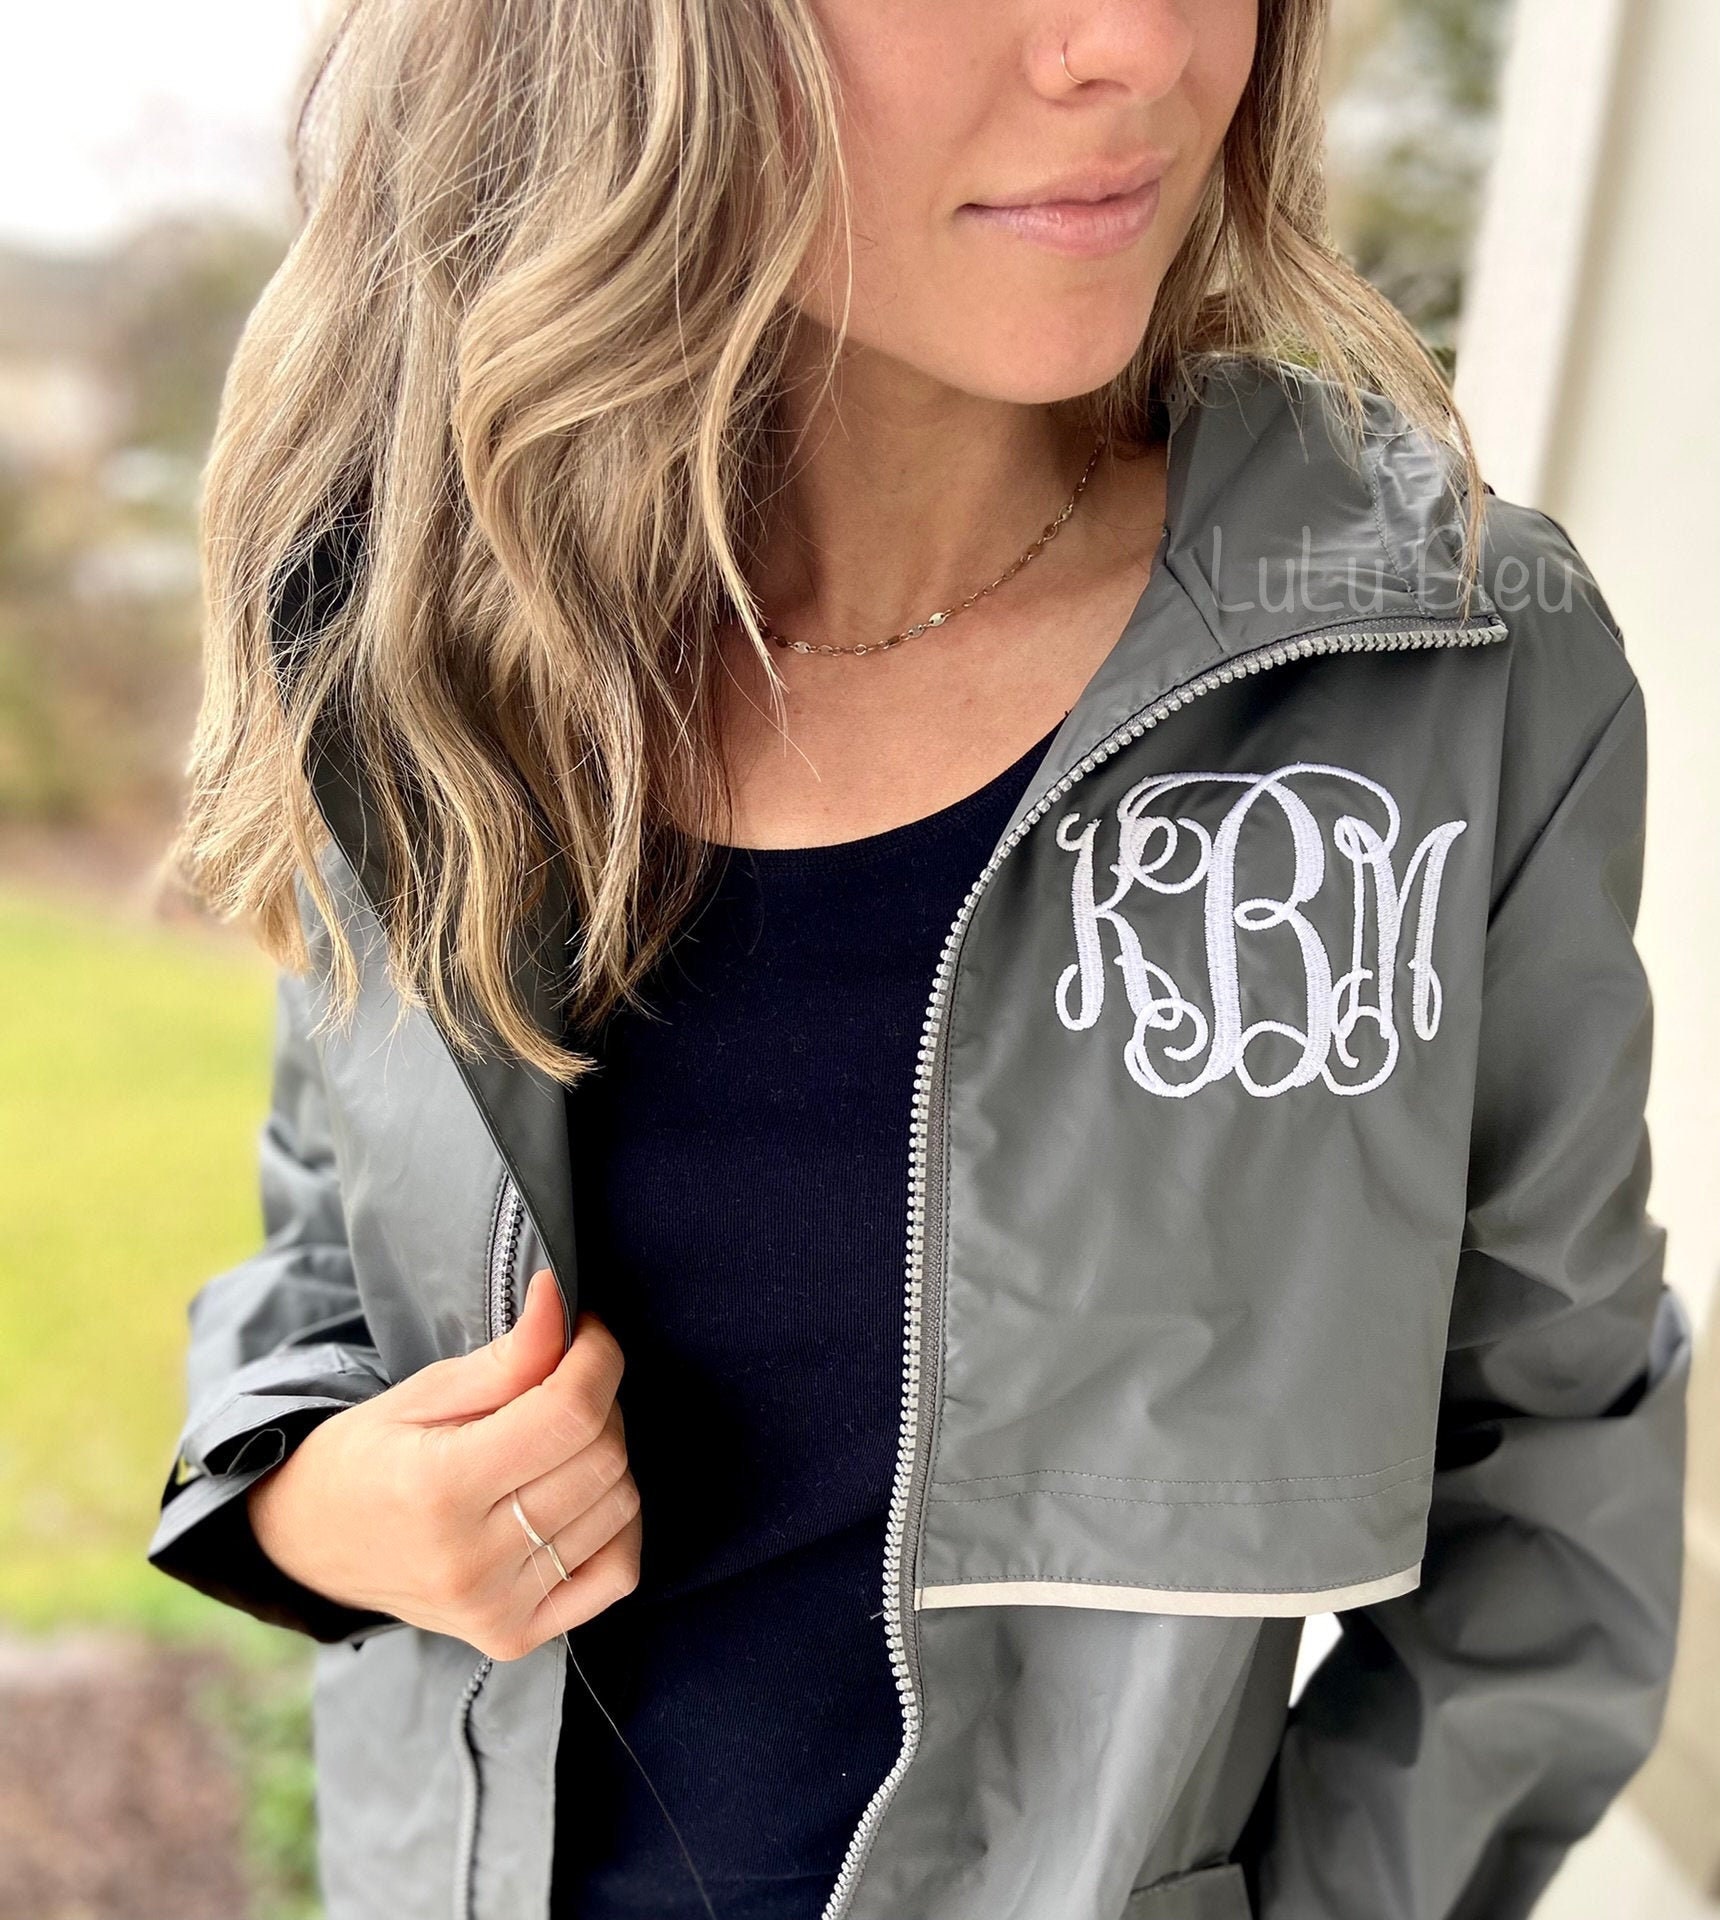 LuLuBleuBoutique Monogram Rain Jacket for Women from Charles rivers, Grey Ladies Rain Jacket with Hood Personalized